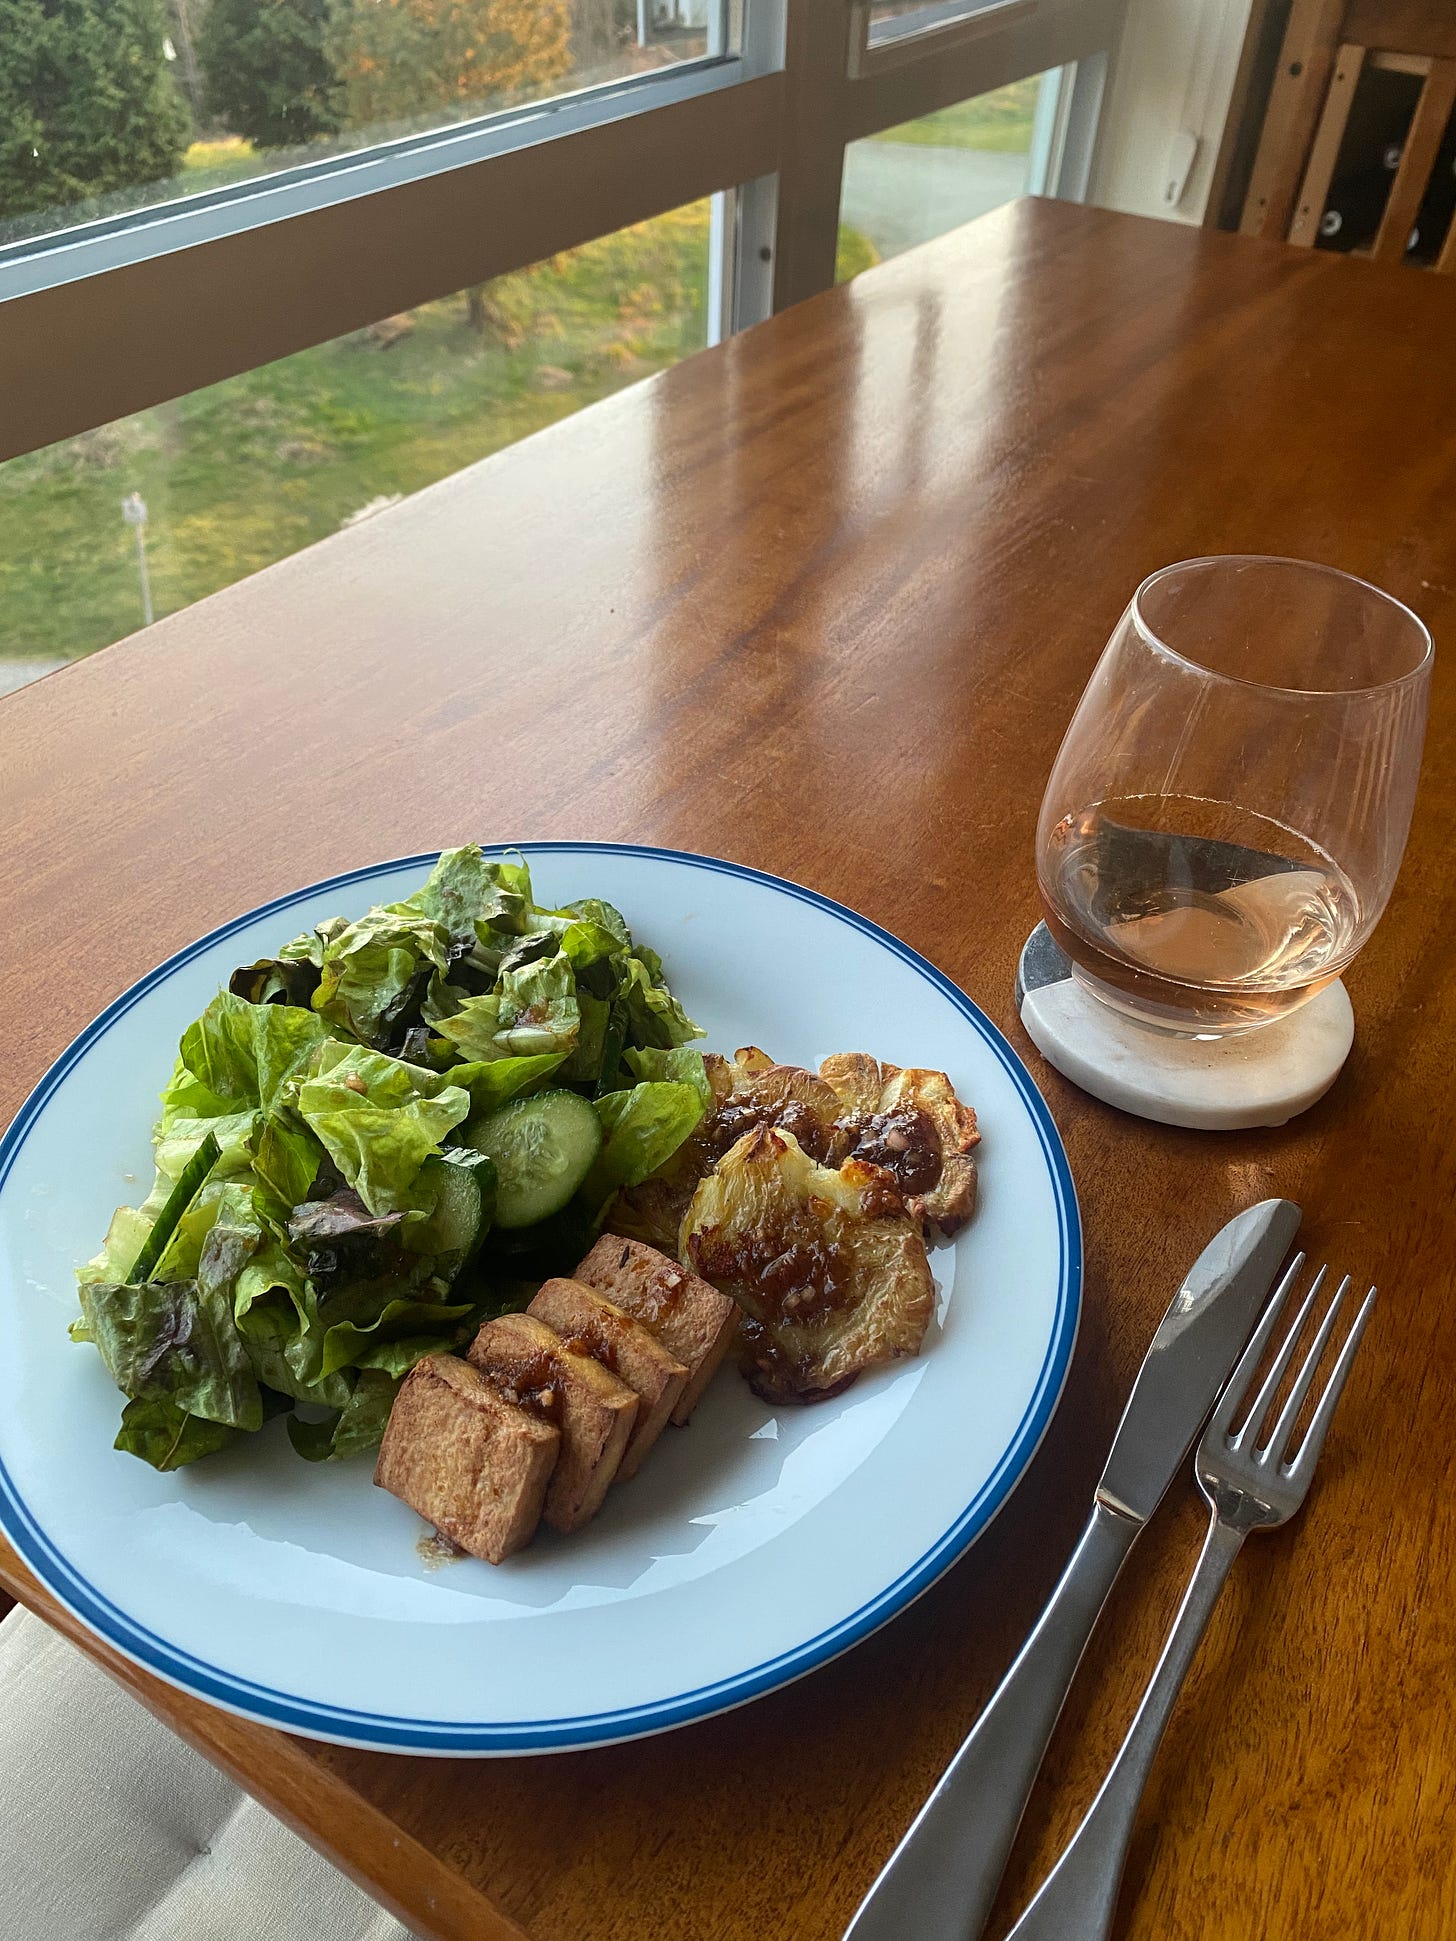 A plate of the salad, potatoes, and tofu described above, arranged with the salad on the left side and the other things in neat stacks or cascades on the other. The tomato dressing is drizzled over everything, and there is a stemless glass of rosé on a coaster next to the plate.